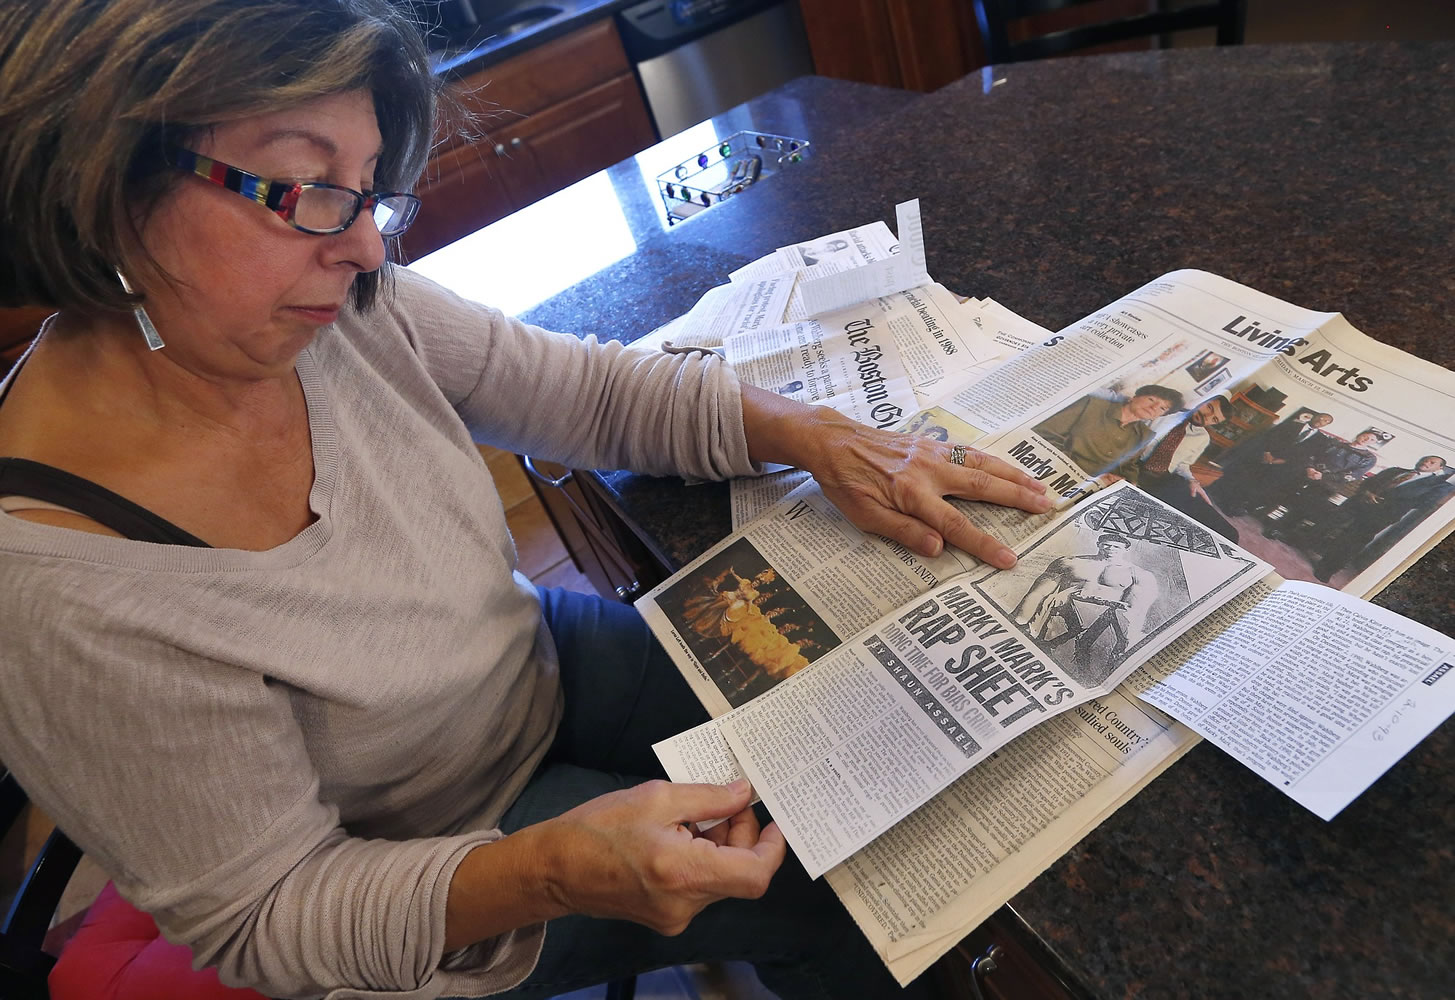 Mary Belmonte reviews newspaper clippings she had collected about Mark Wahlberg at her home in Westwood, Mass.